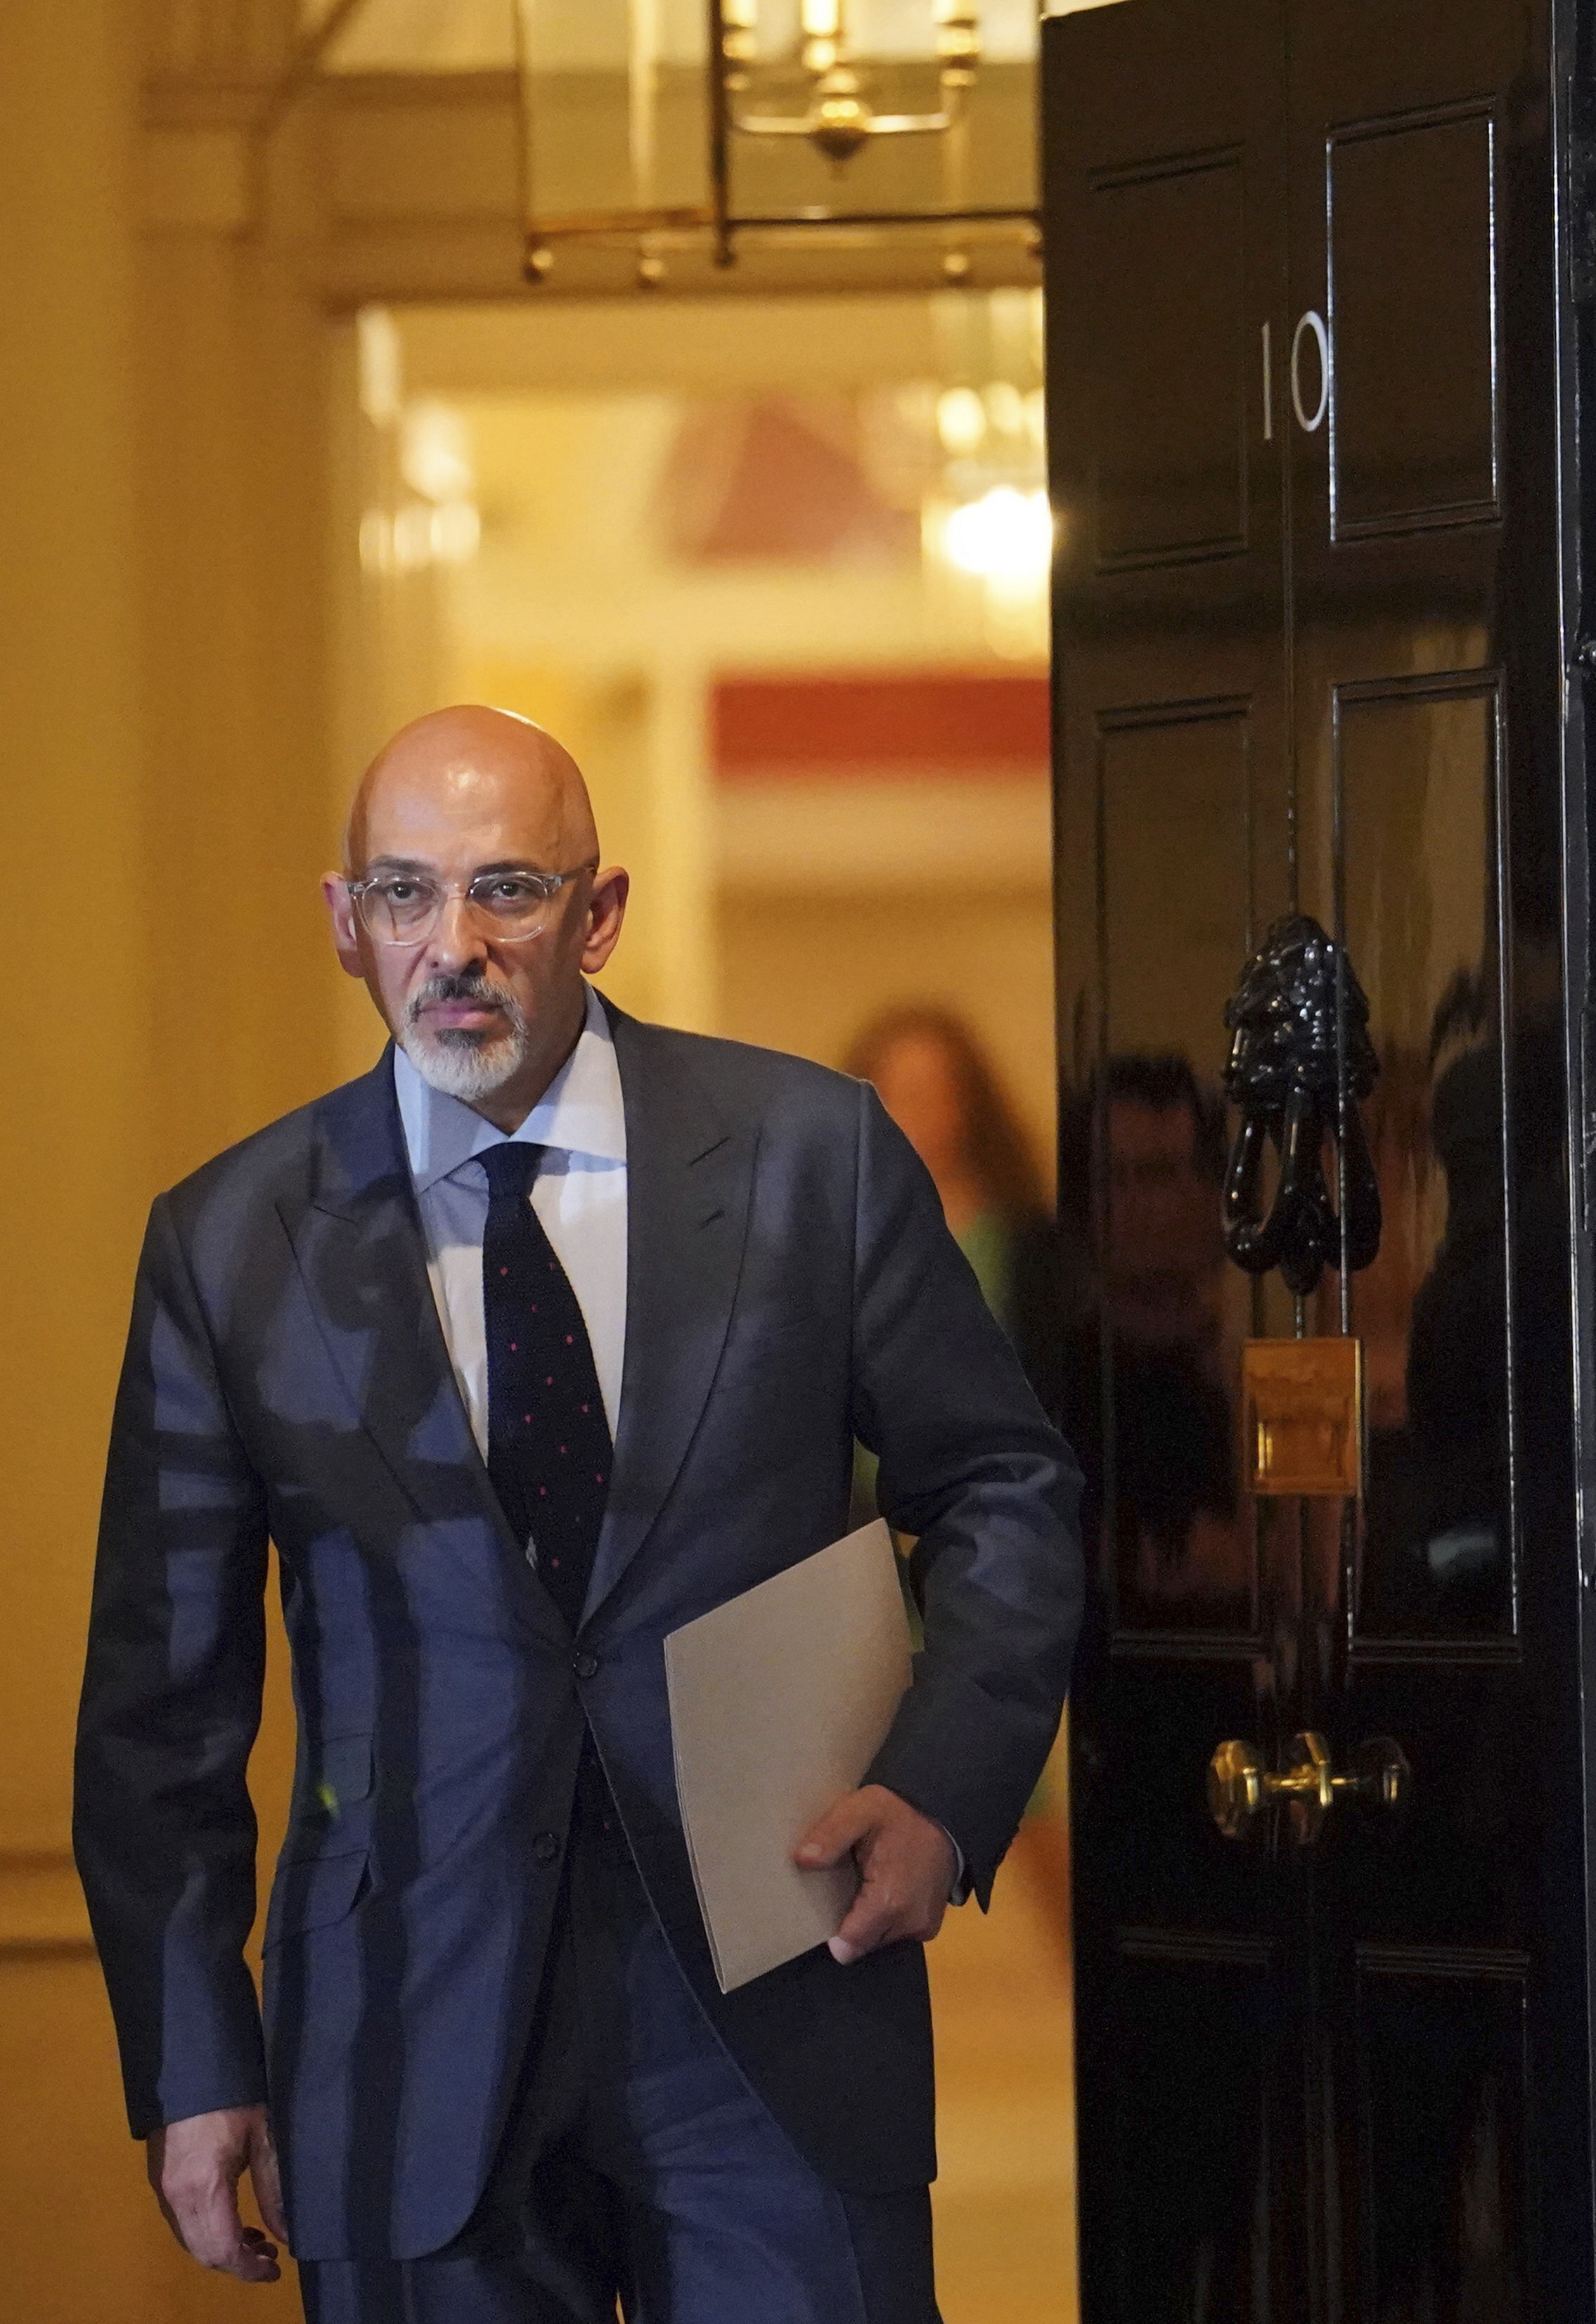 Nadhim Zahawi leaves 10 Downing Street, in London, following the resignation of two senior cabinet ministers on July 5, 2022. (Dominic Lipinski—PA/AP)